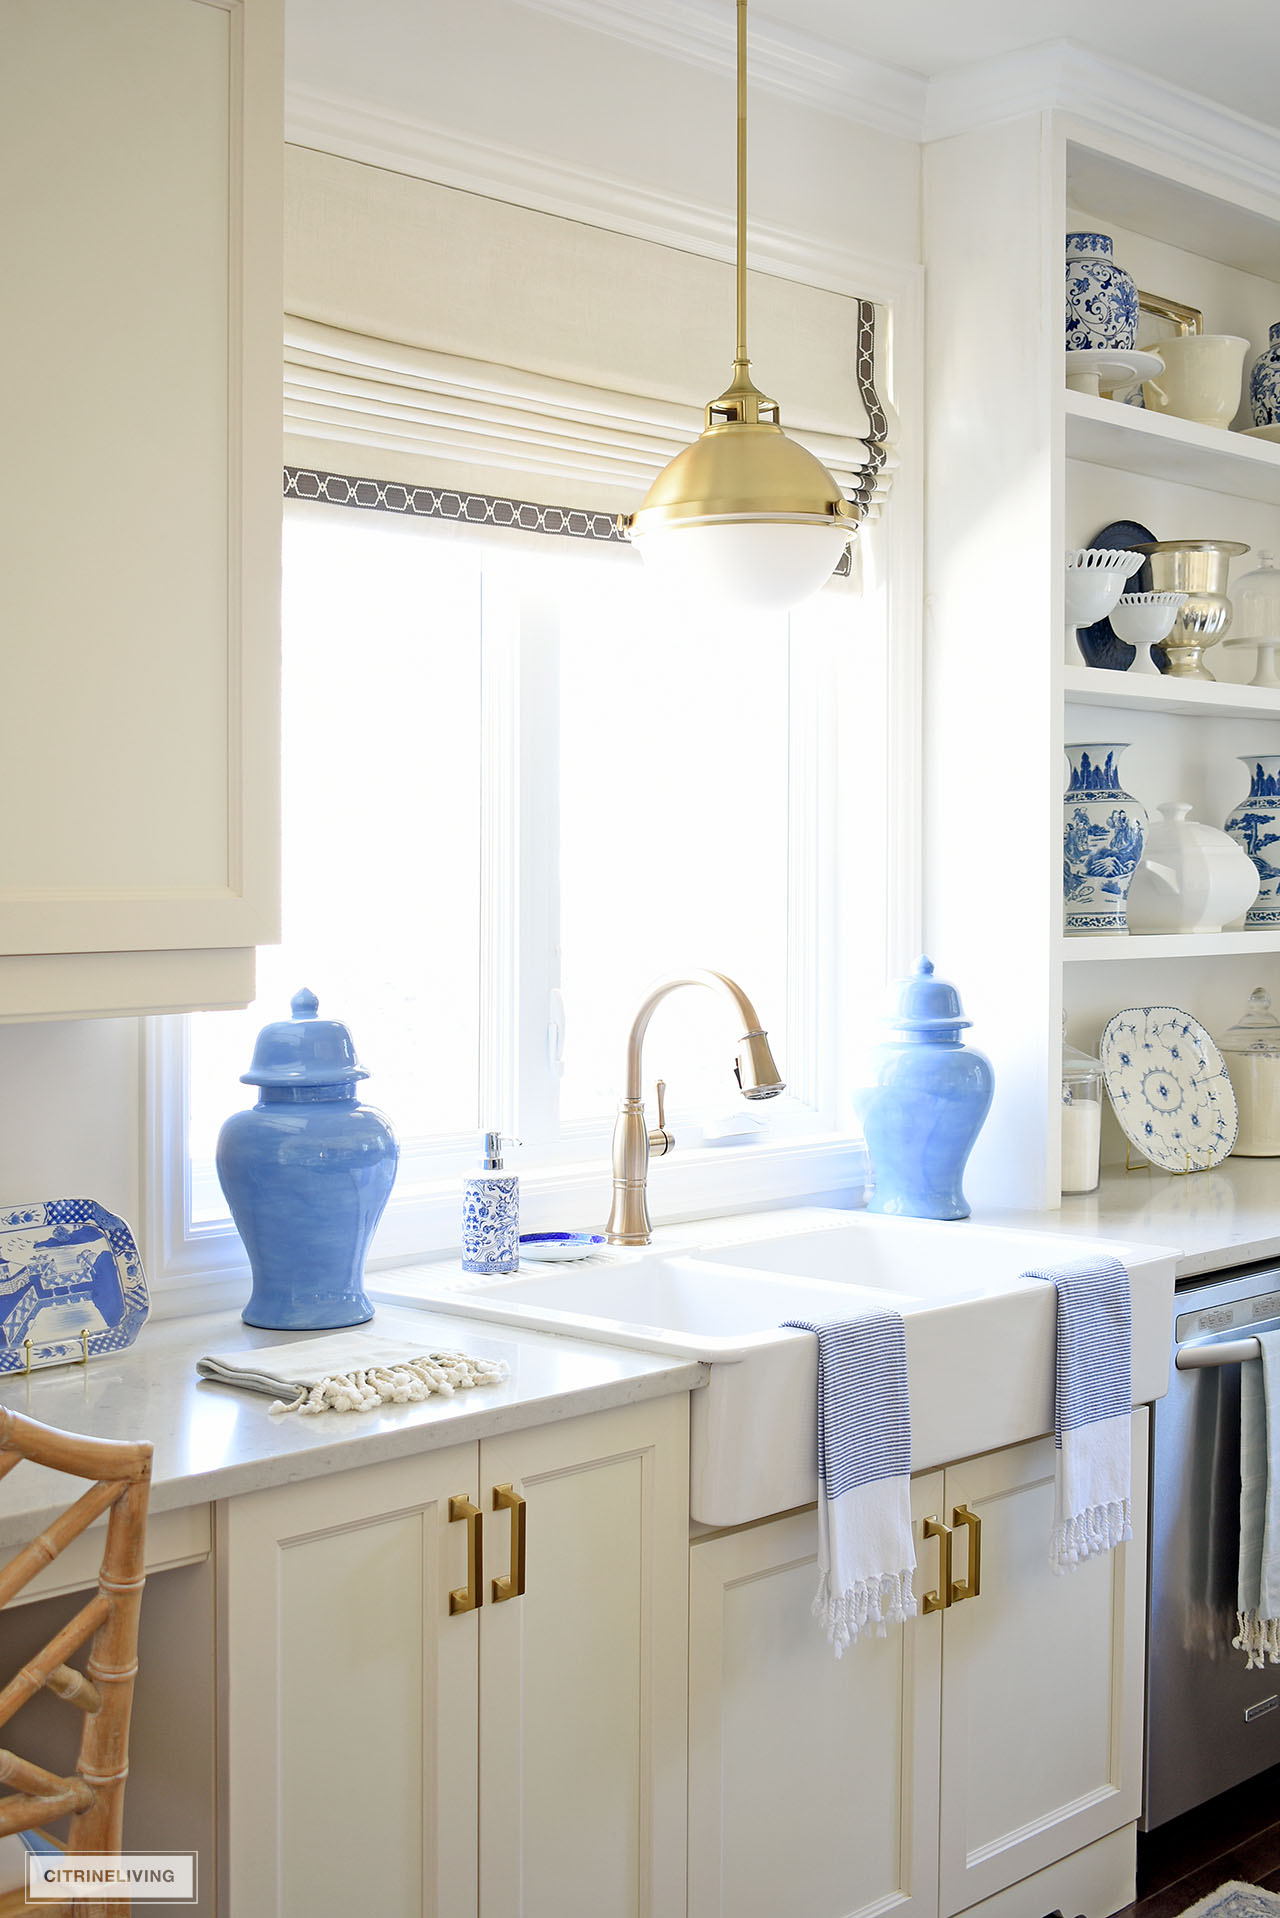 An elegant white farmhouse sink styled with blue ginger jars on each side for a classic, symmetrical display.